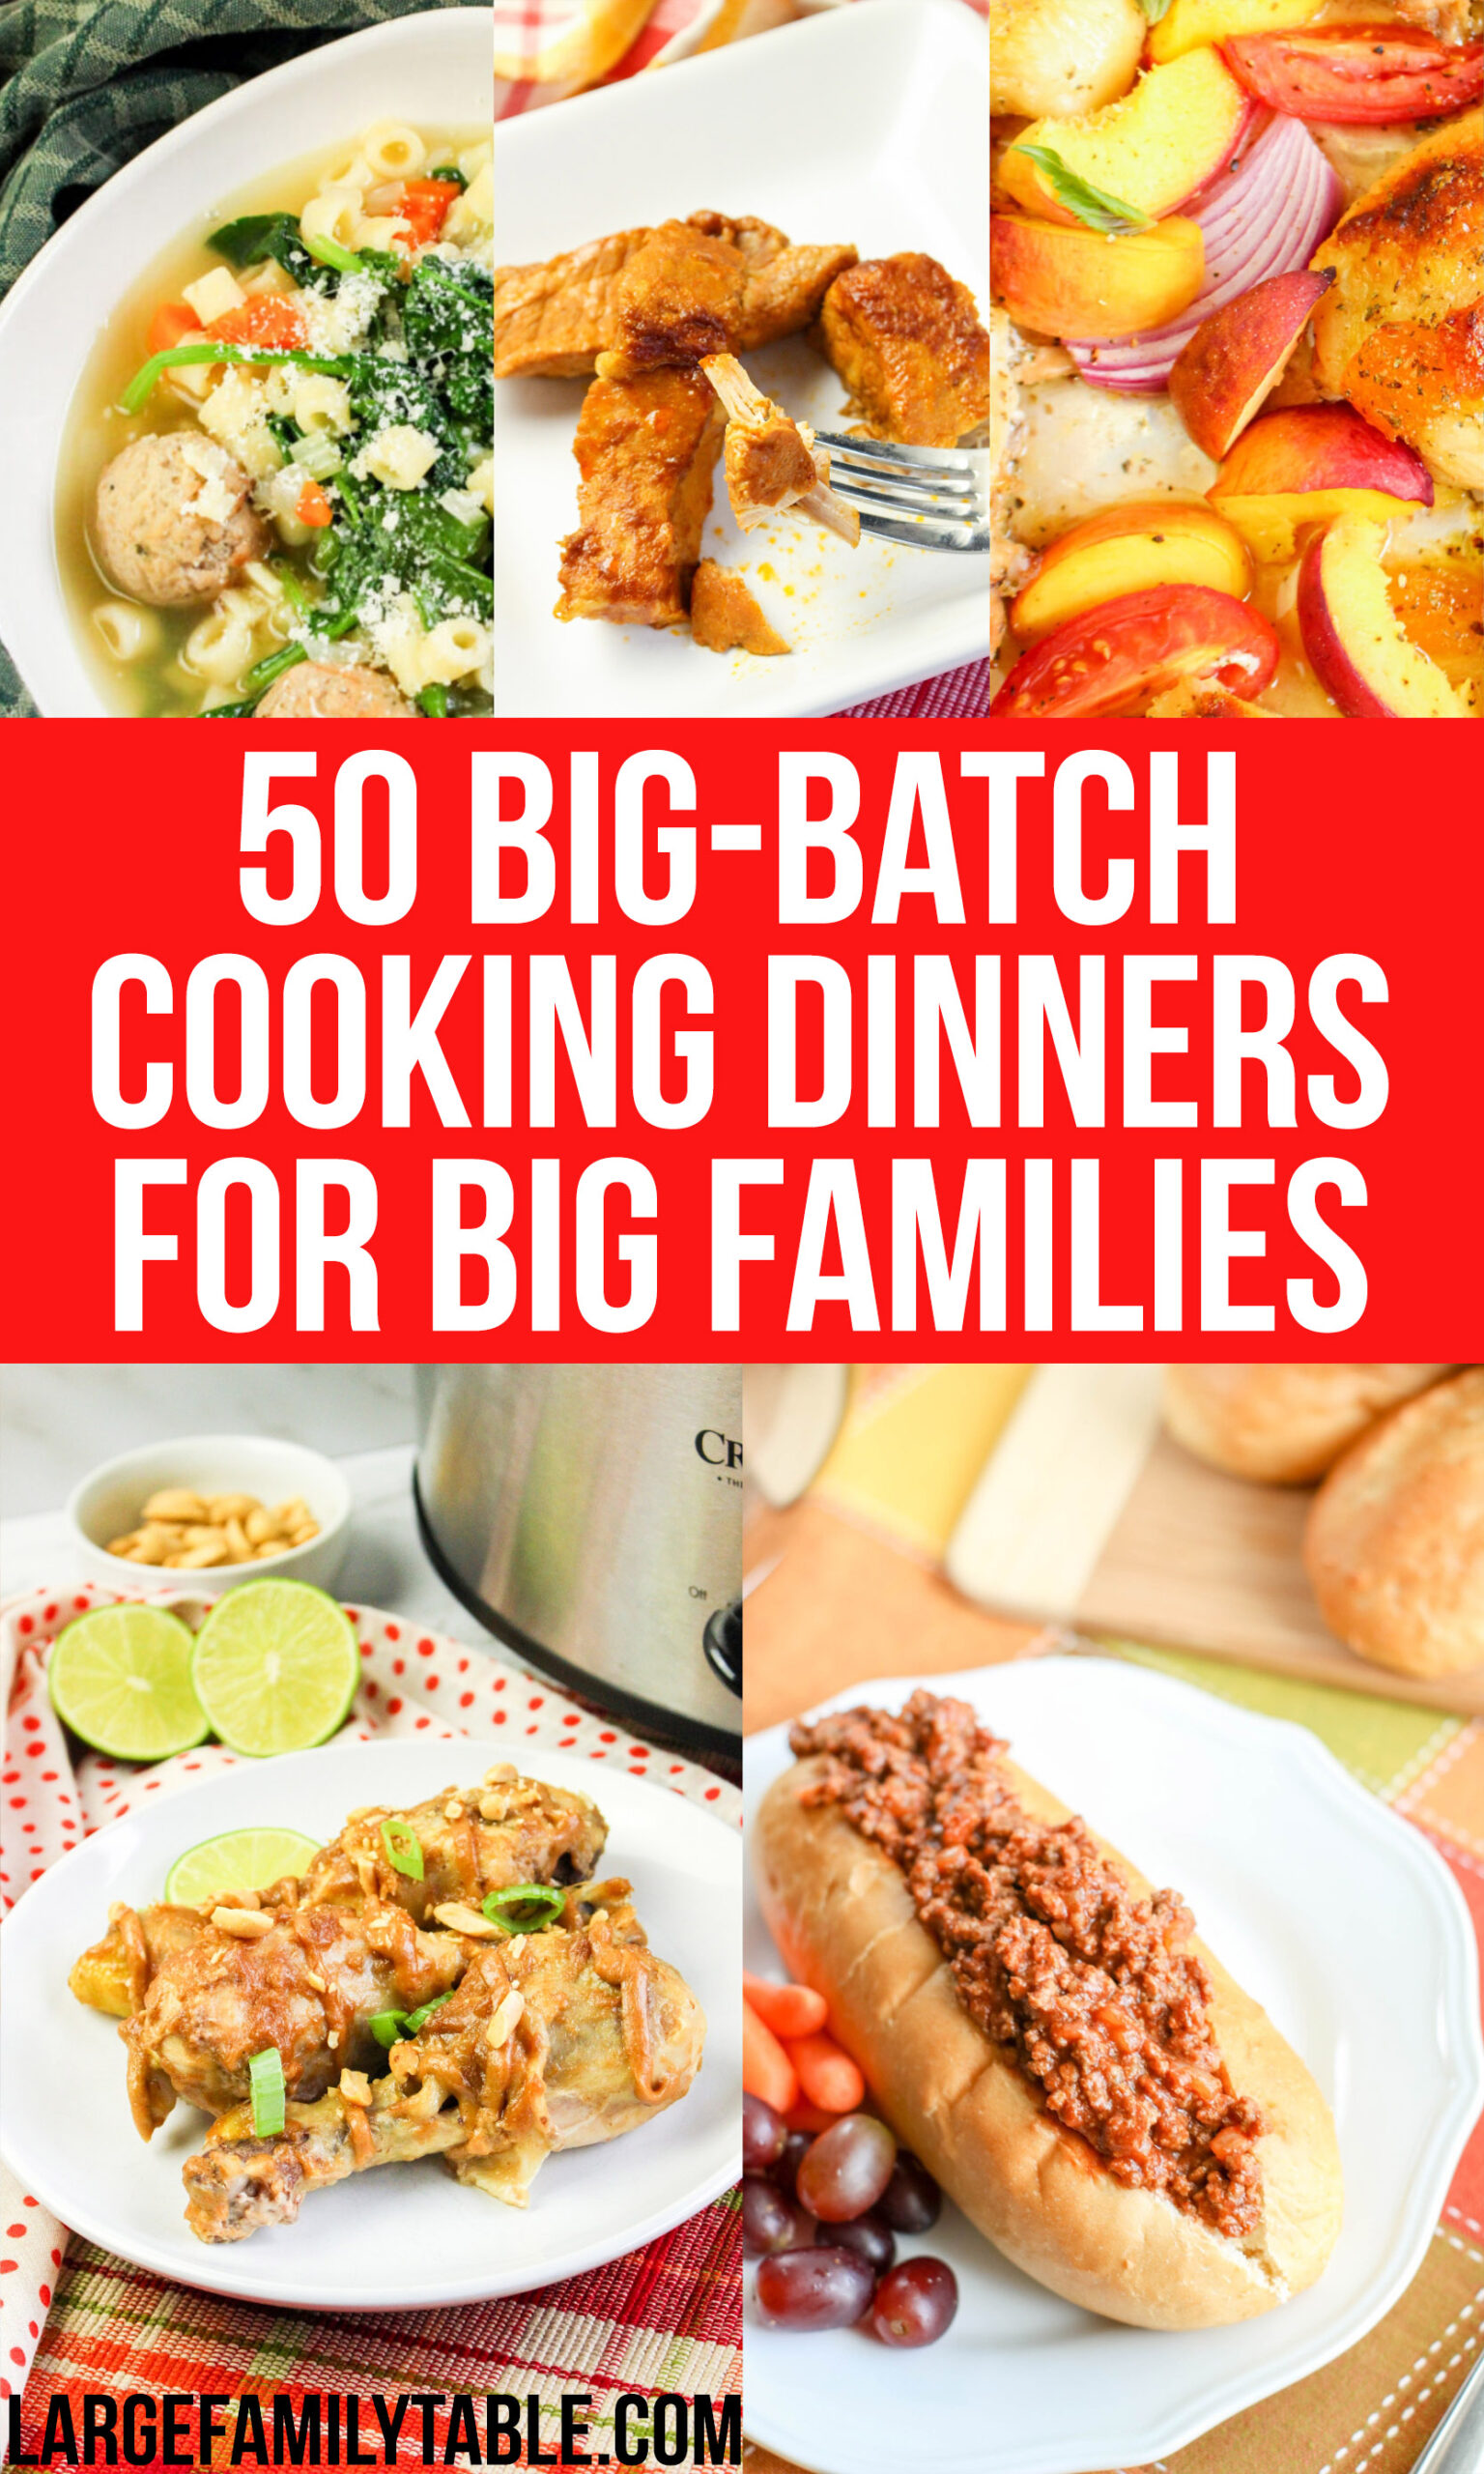 50-Big-Batch-Cooking-Dinner-Ideas-for-Large-Families